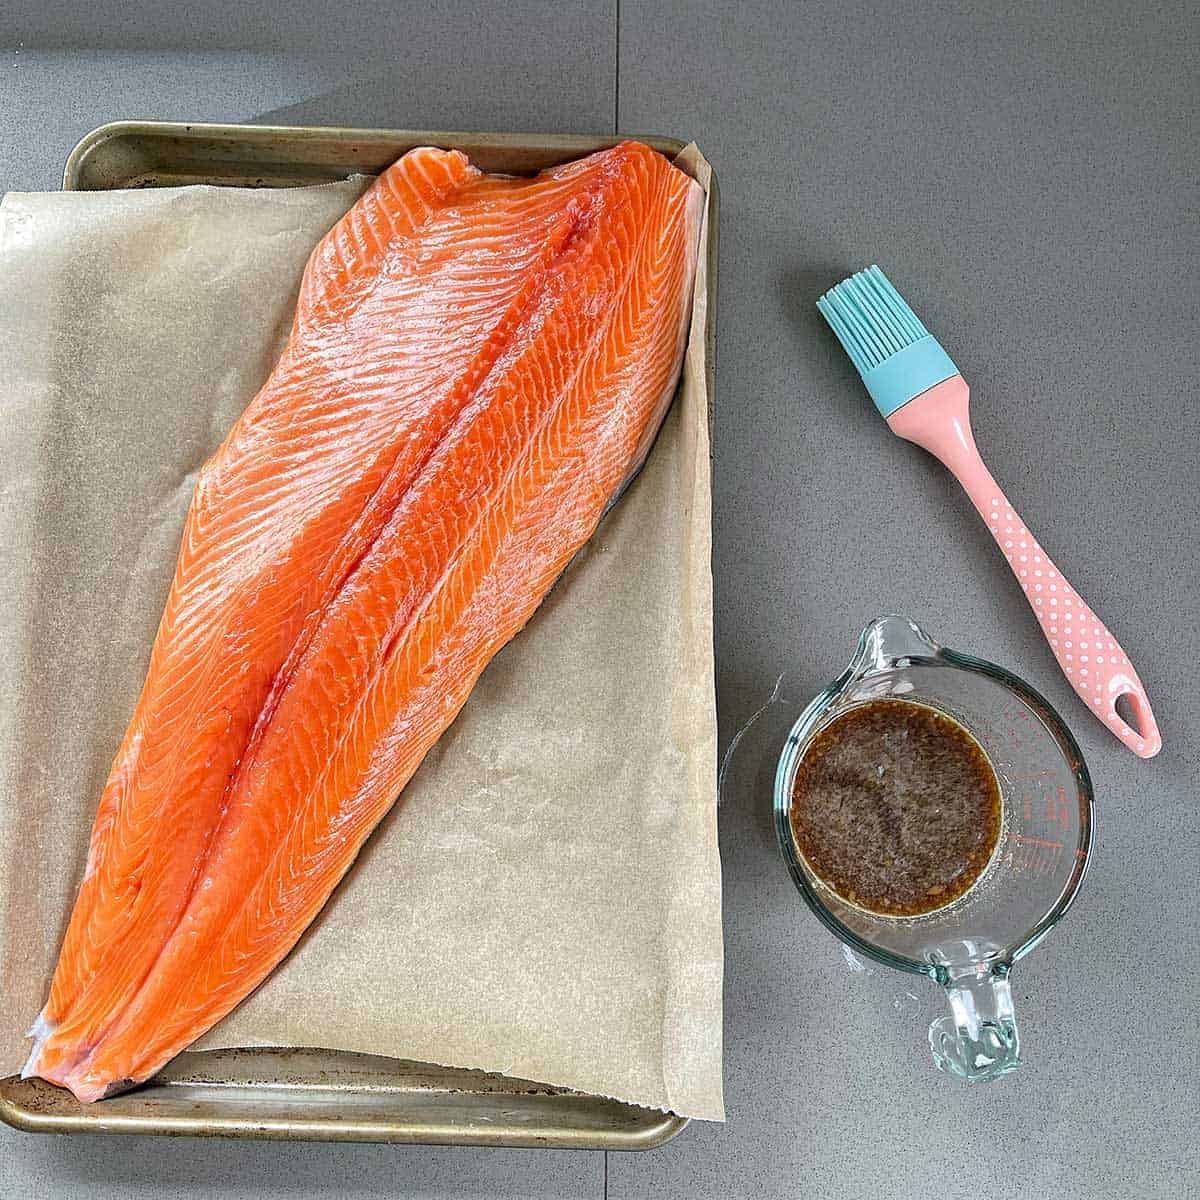 A whole fillet of salmon on a lined baking tray next to a jar of glaze and a brush.